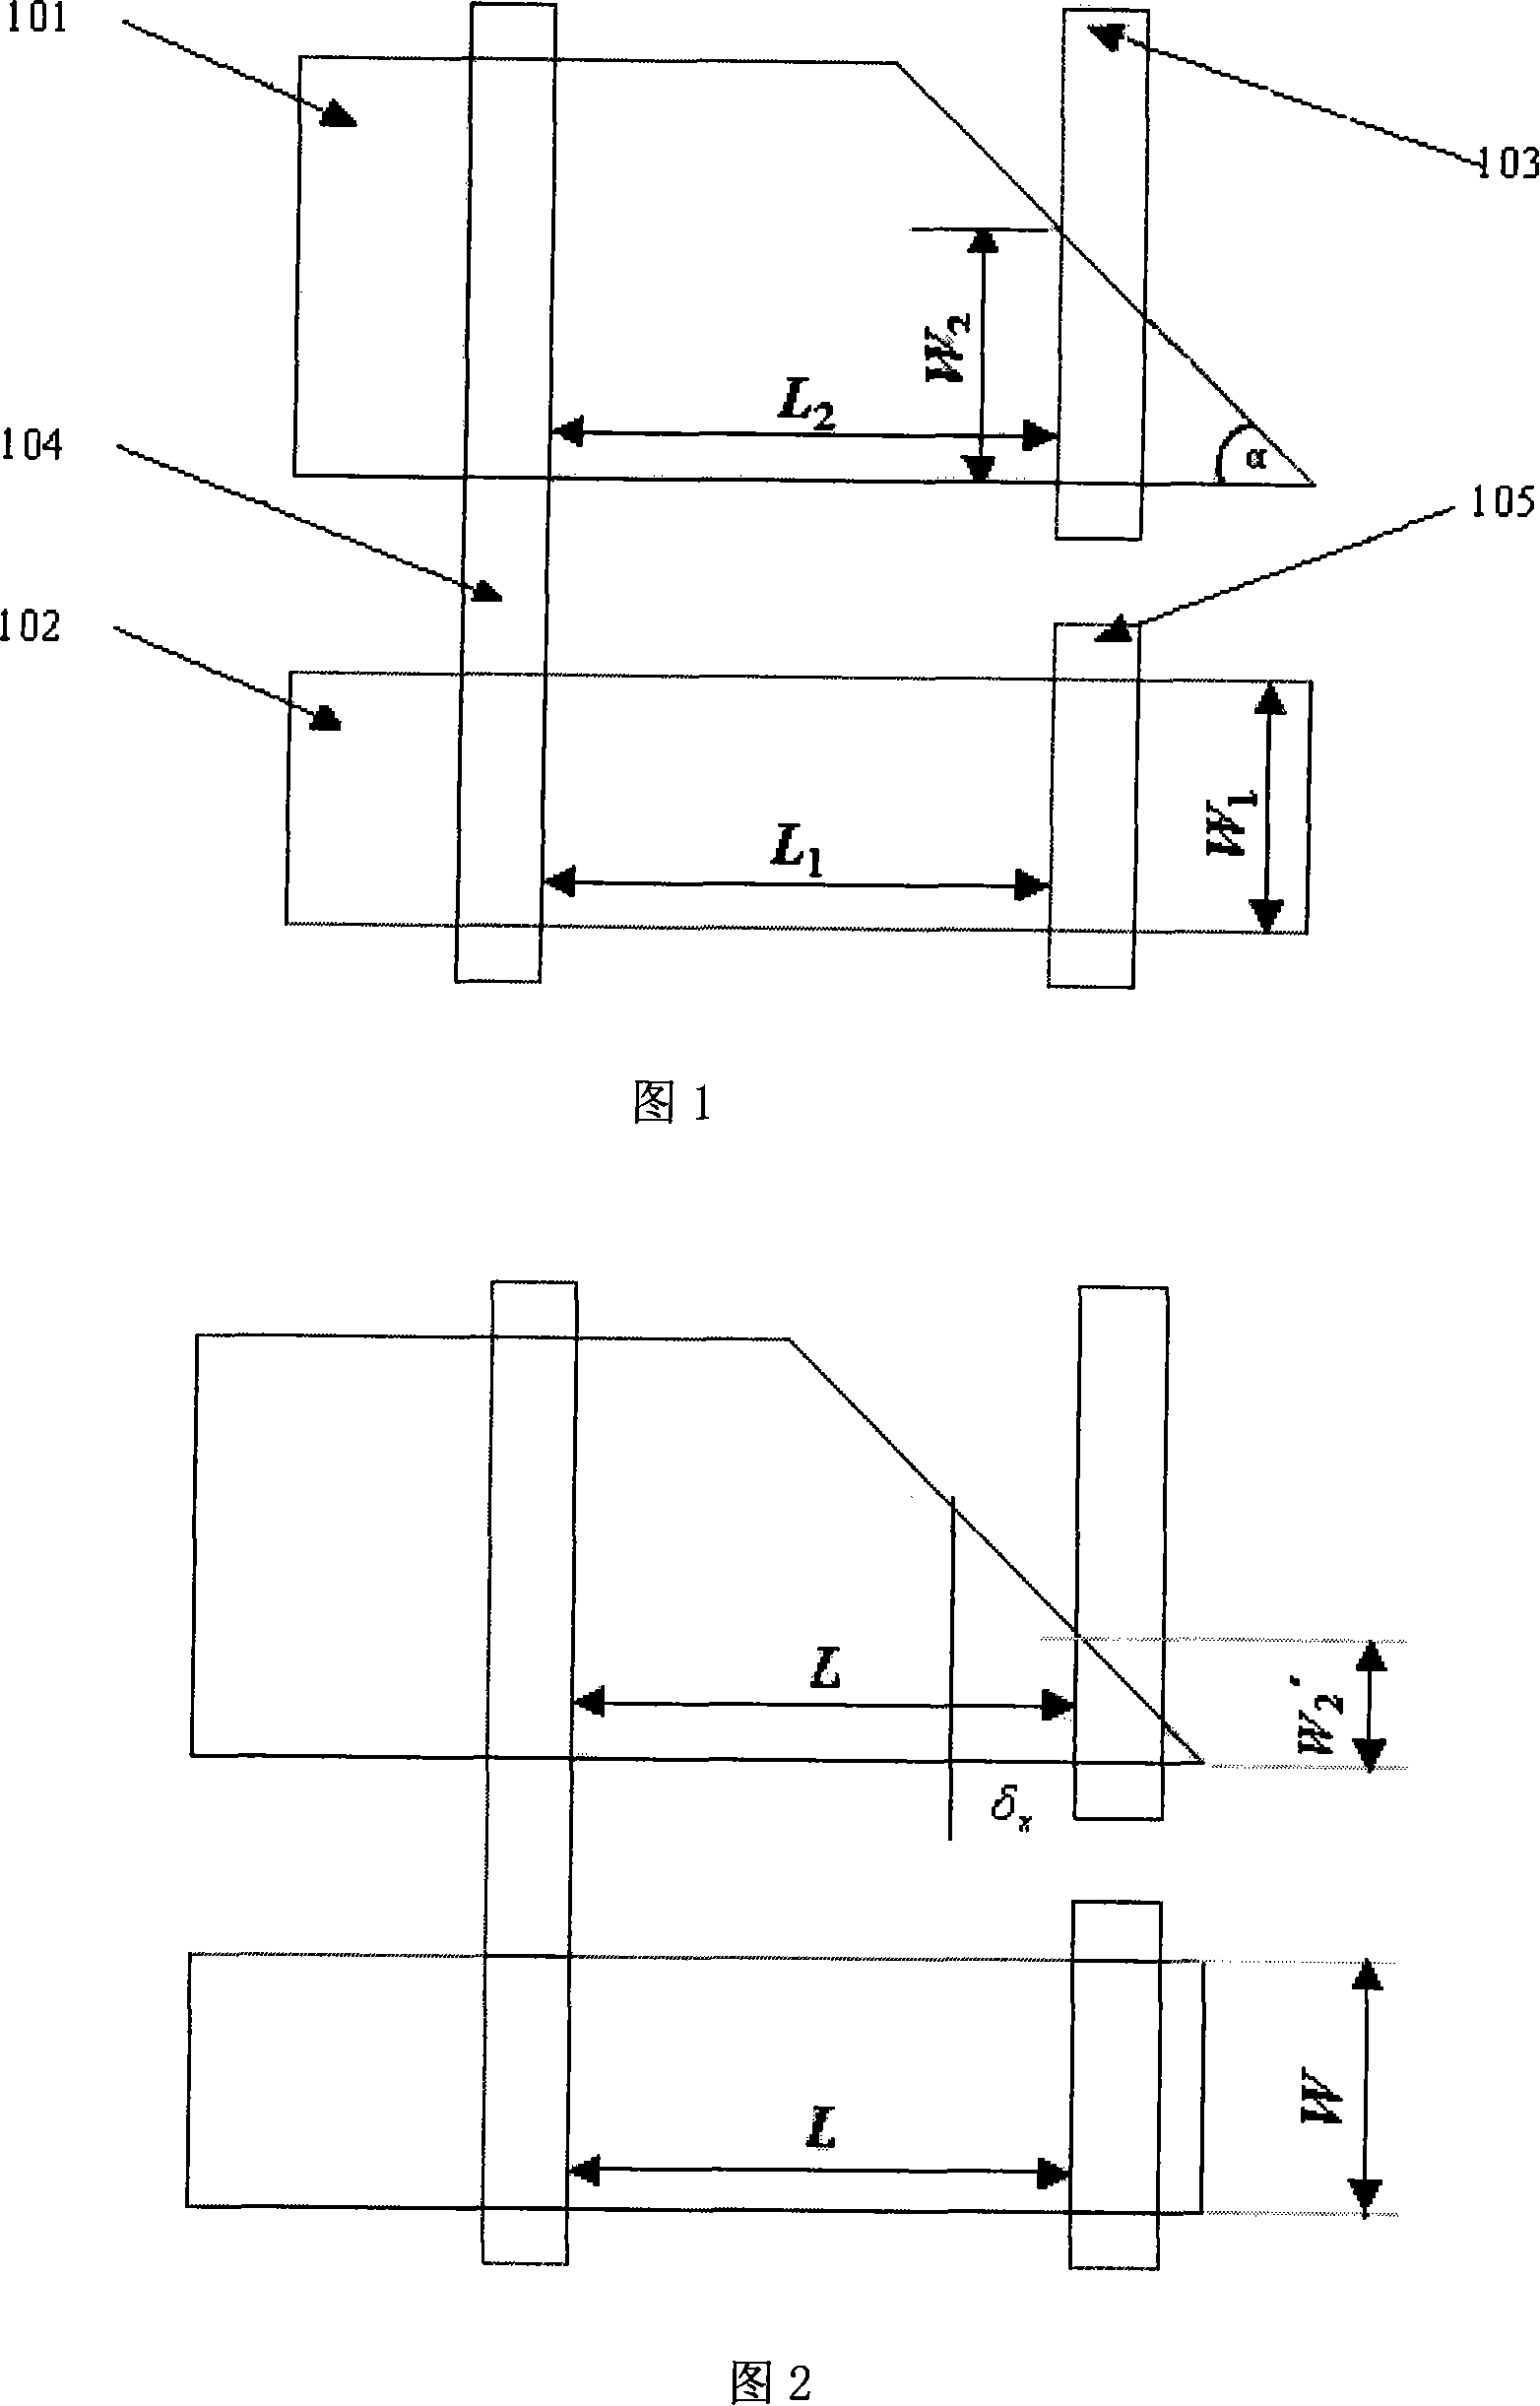 Different conductive layers alignment error electricity testing structure in micromotor system apparatus process